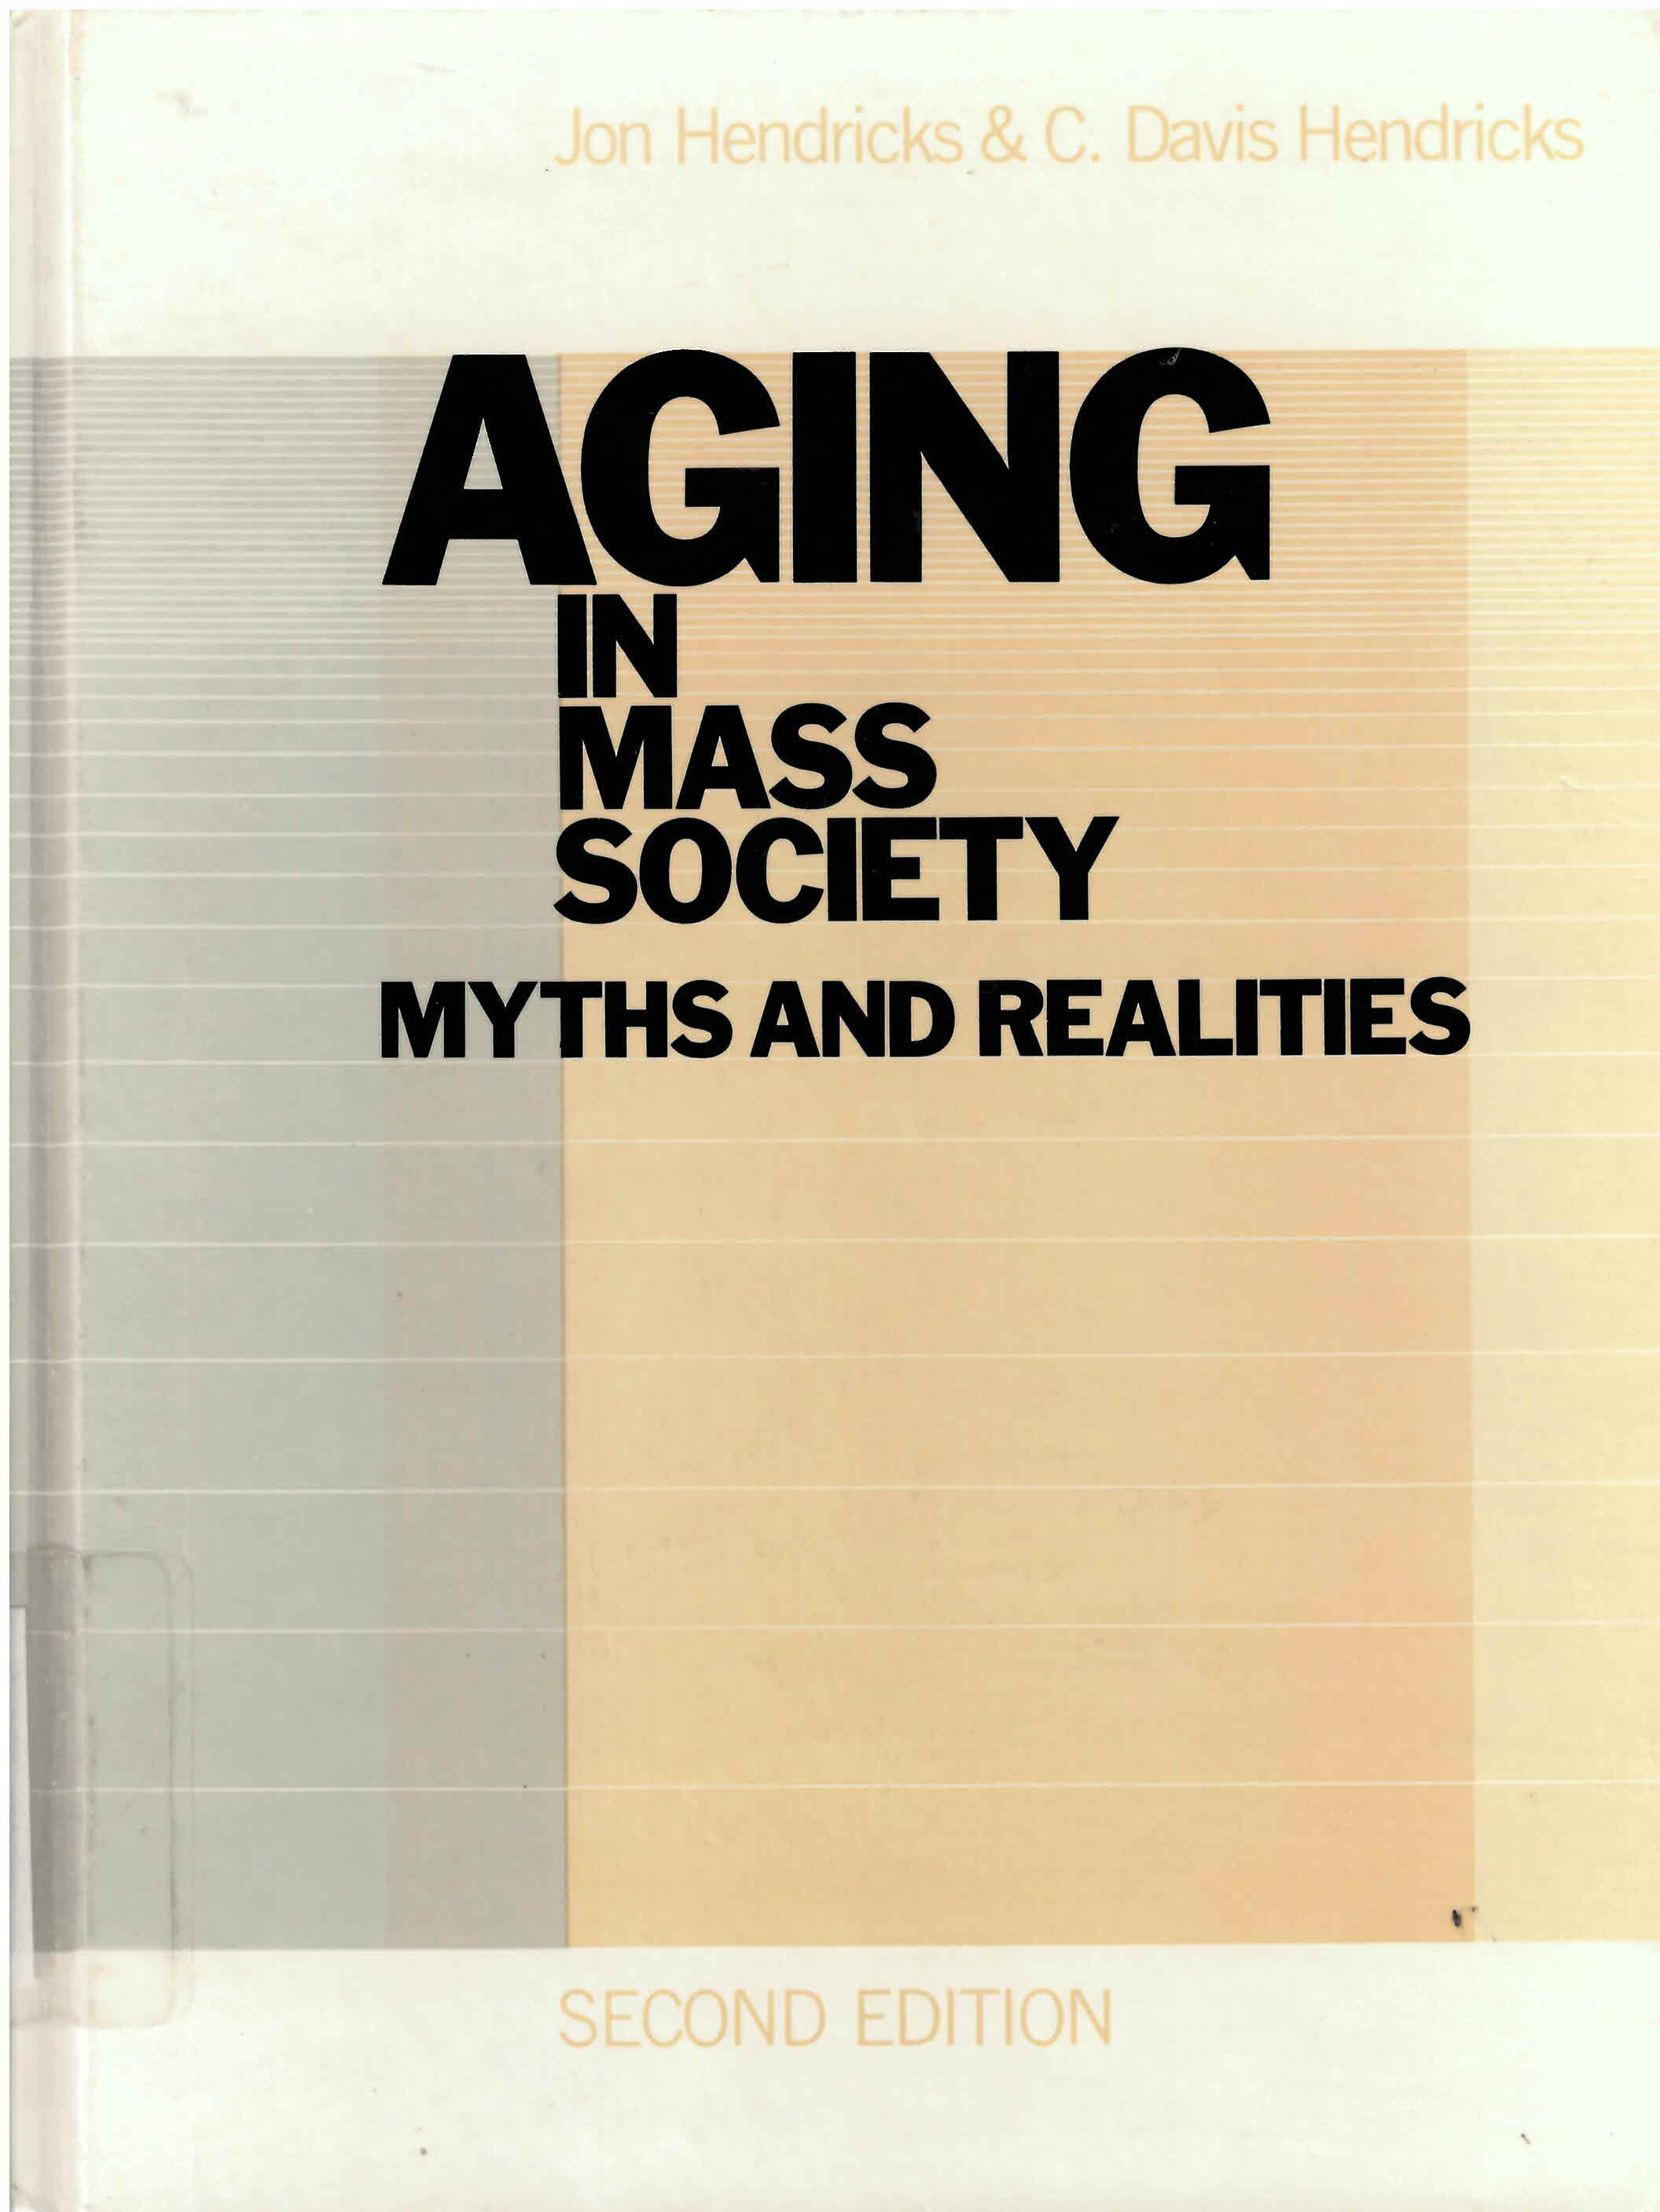 Aging in mass society : myths and realities